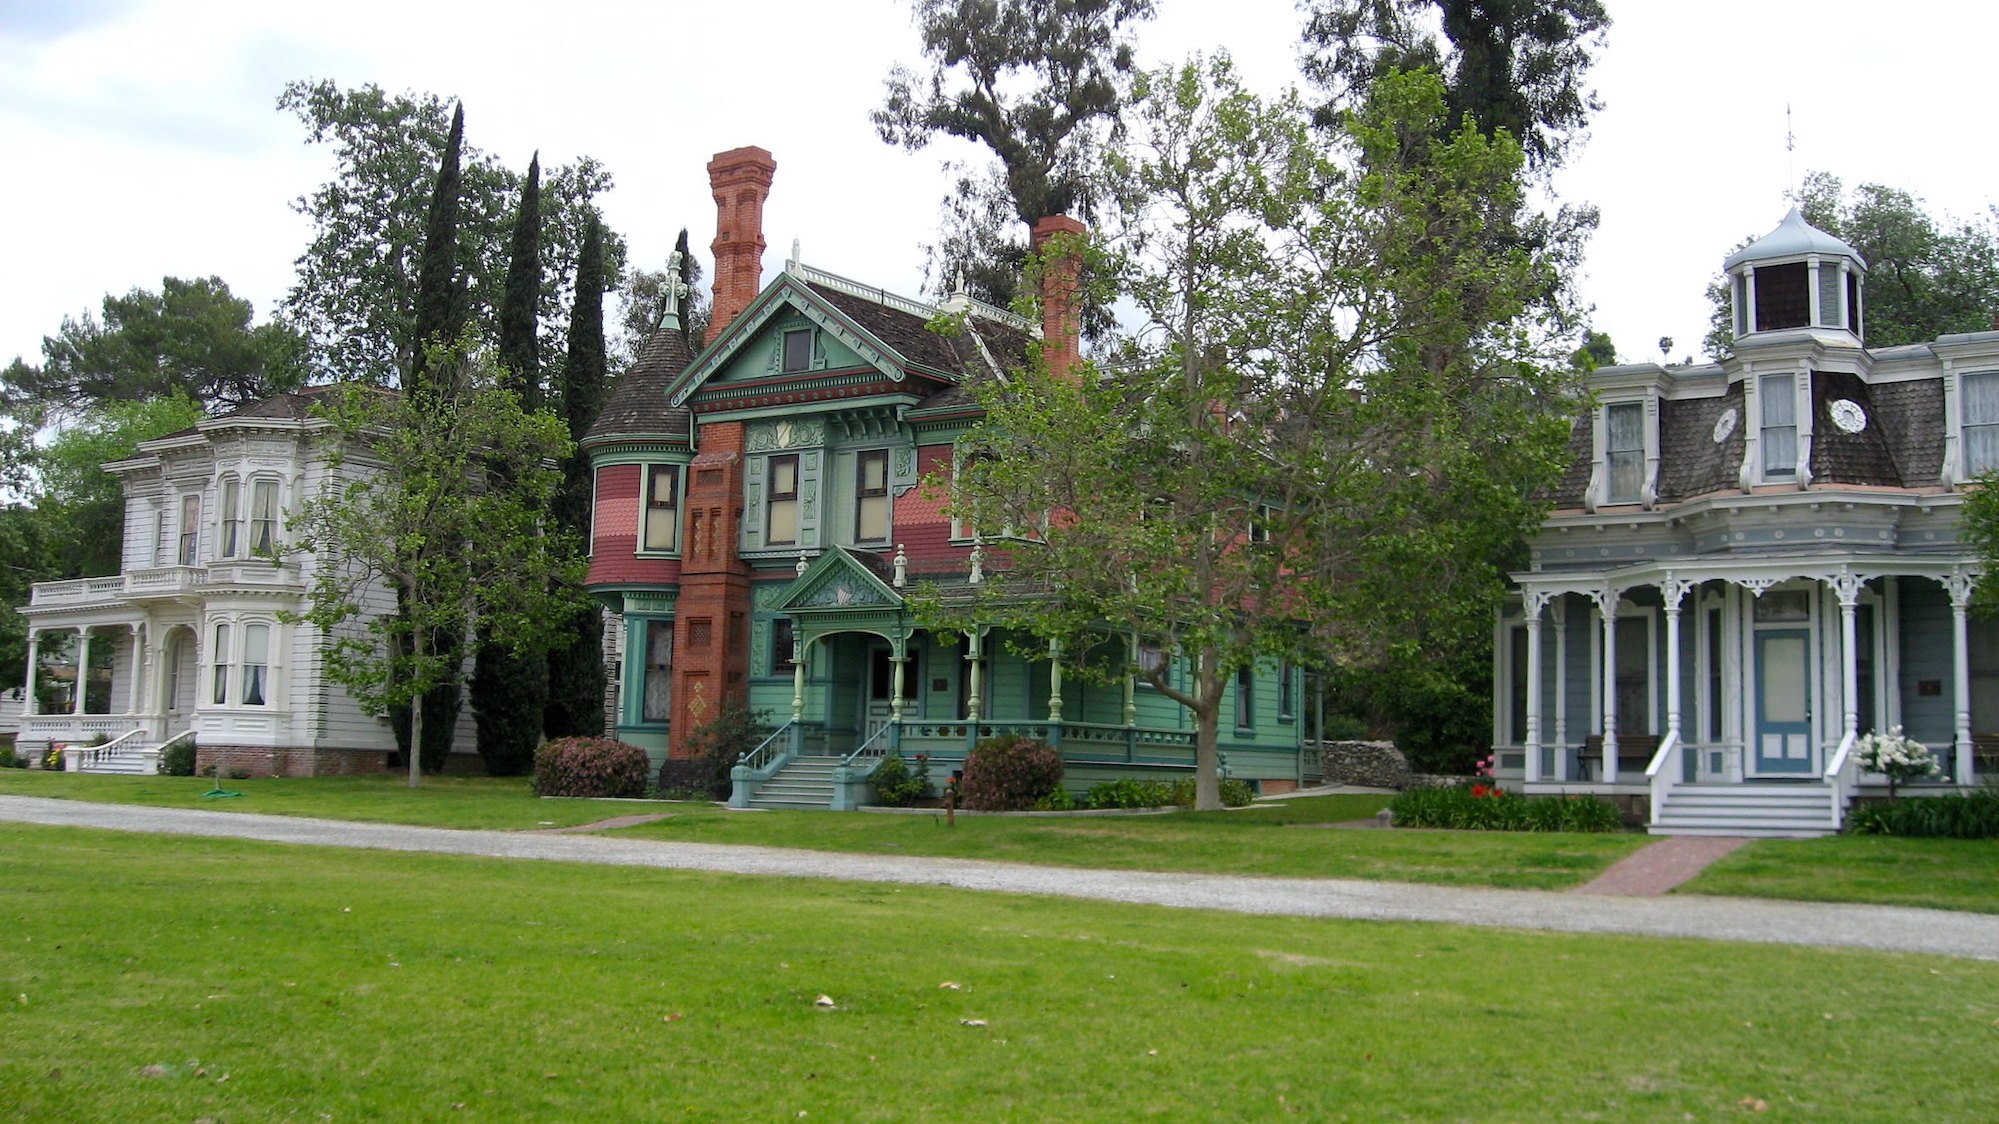 3 Victorian homes at Heritage Square Musuem